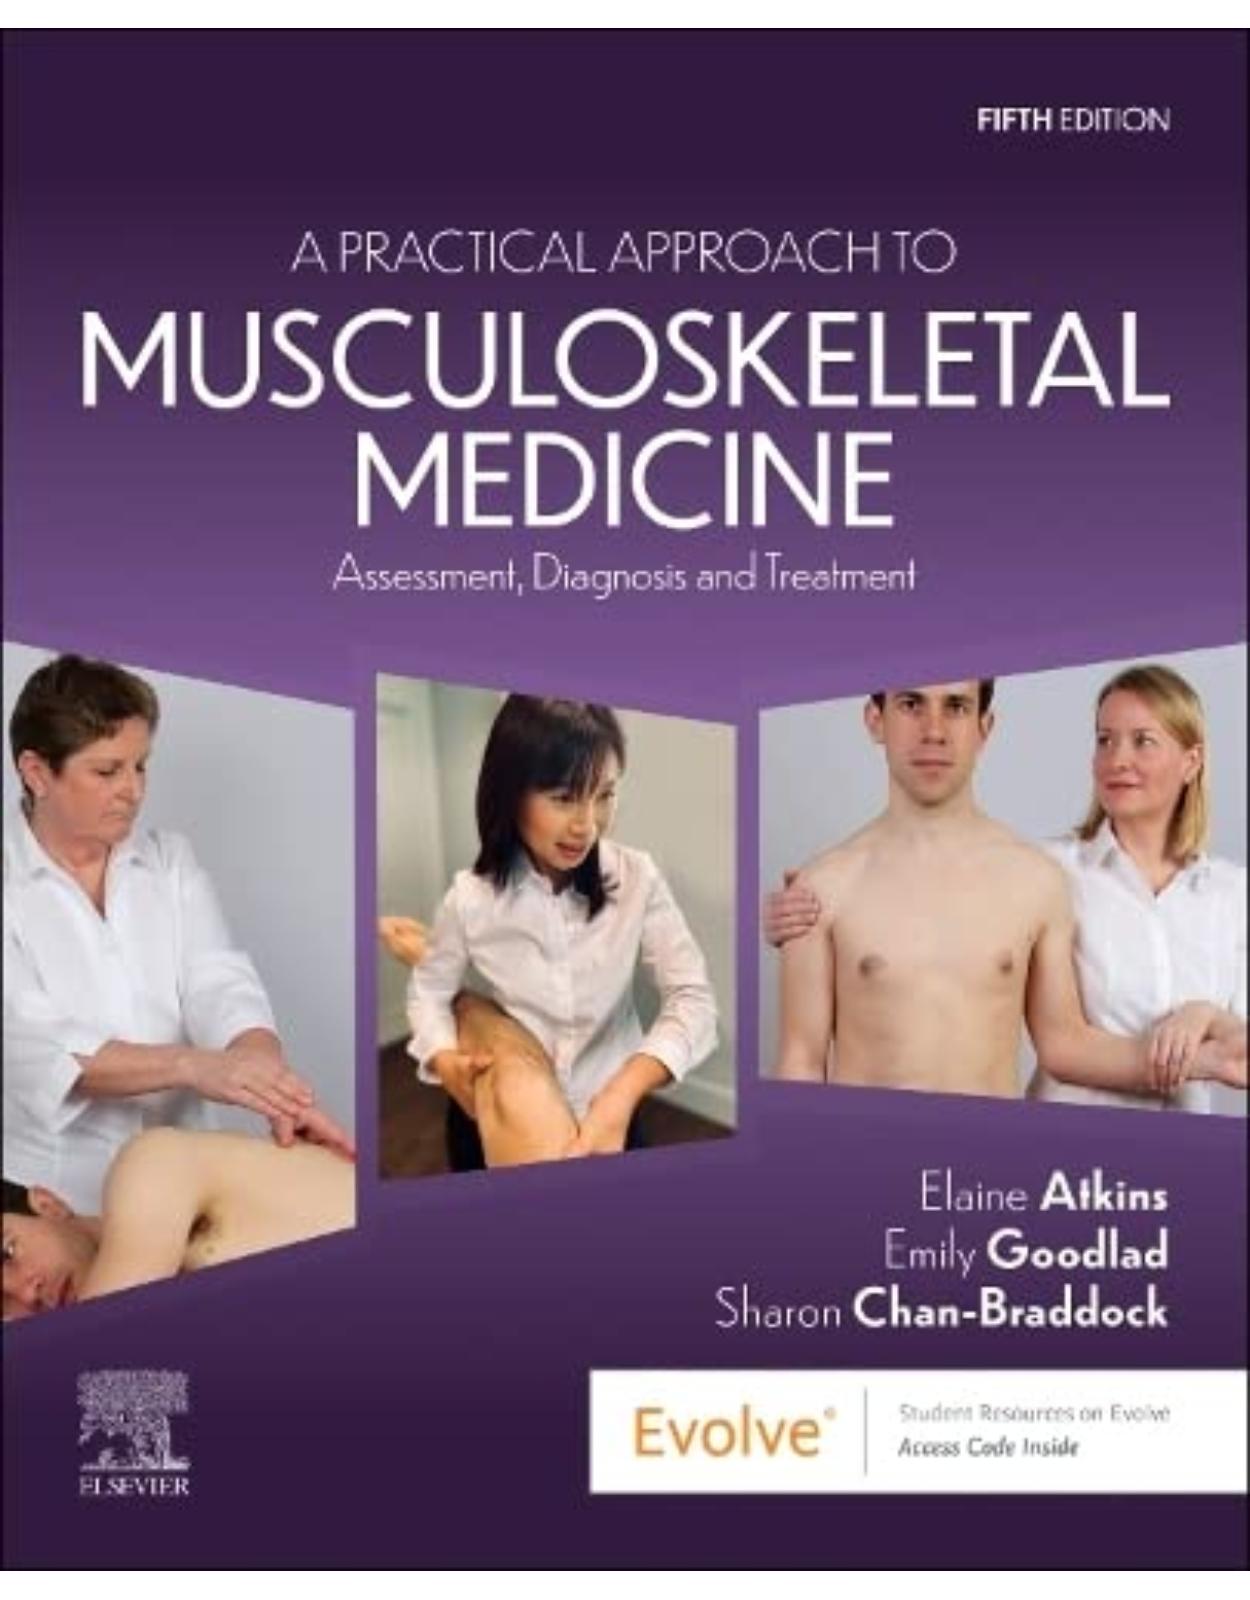 A Practical Approach to Musculoskeletal Medicine: Assessment, Diagnosis and Treatment